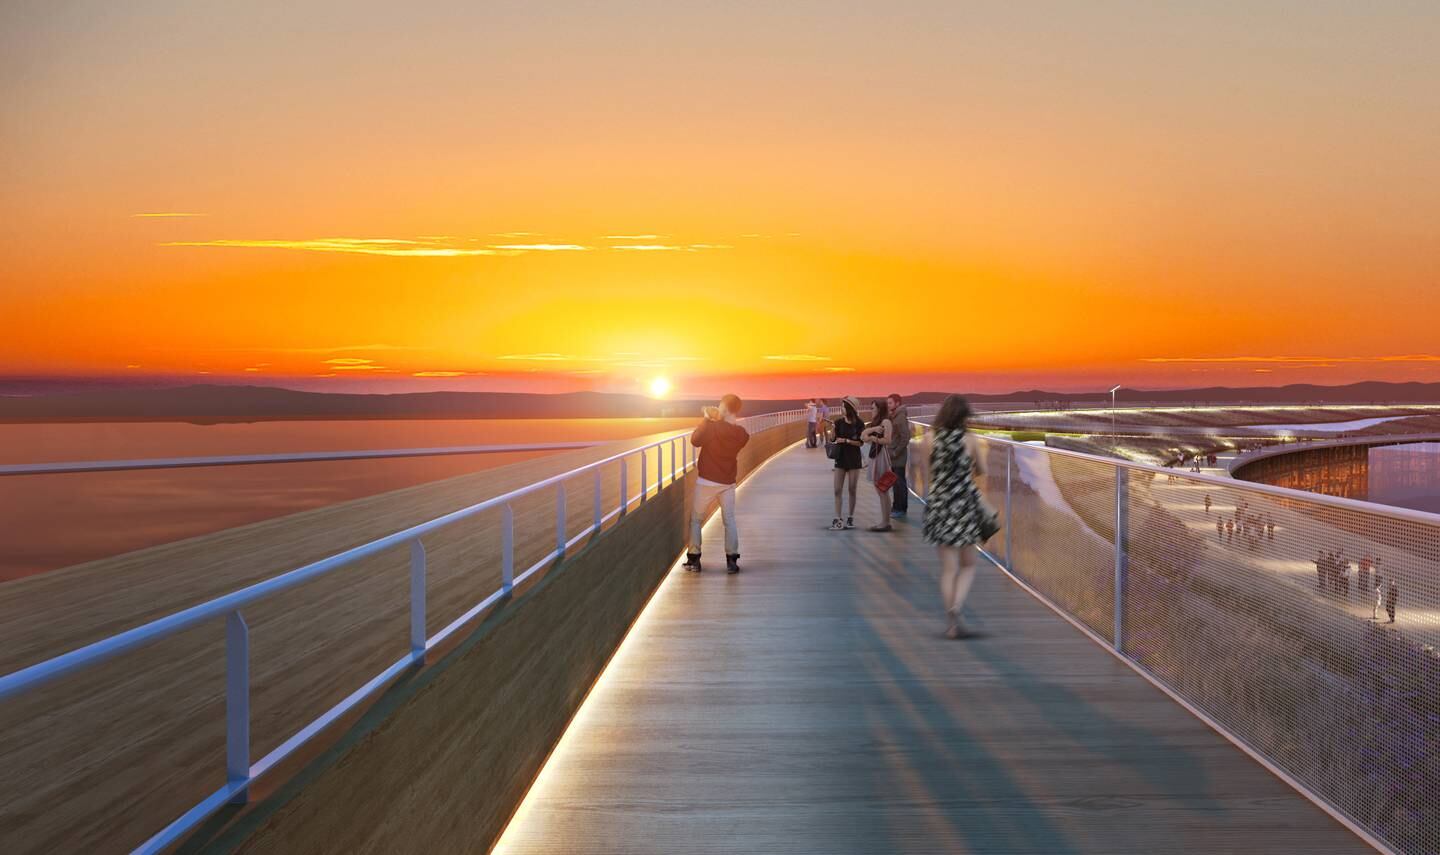 Visitors will be able to walk a couple of kilometres across the wooden roof that will have observation decks to watch the sunset